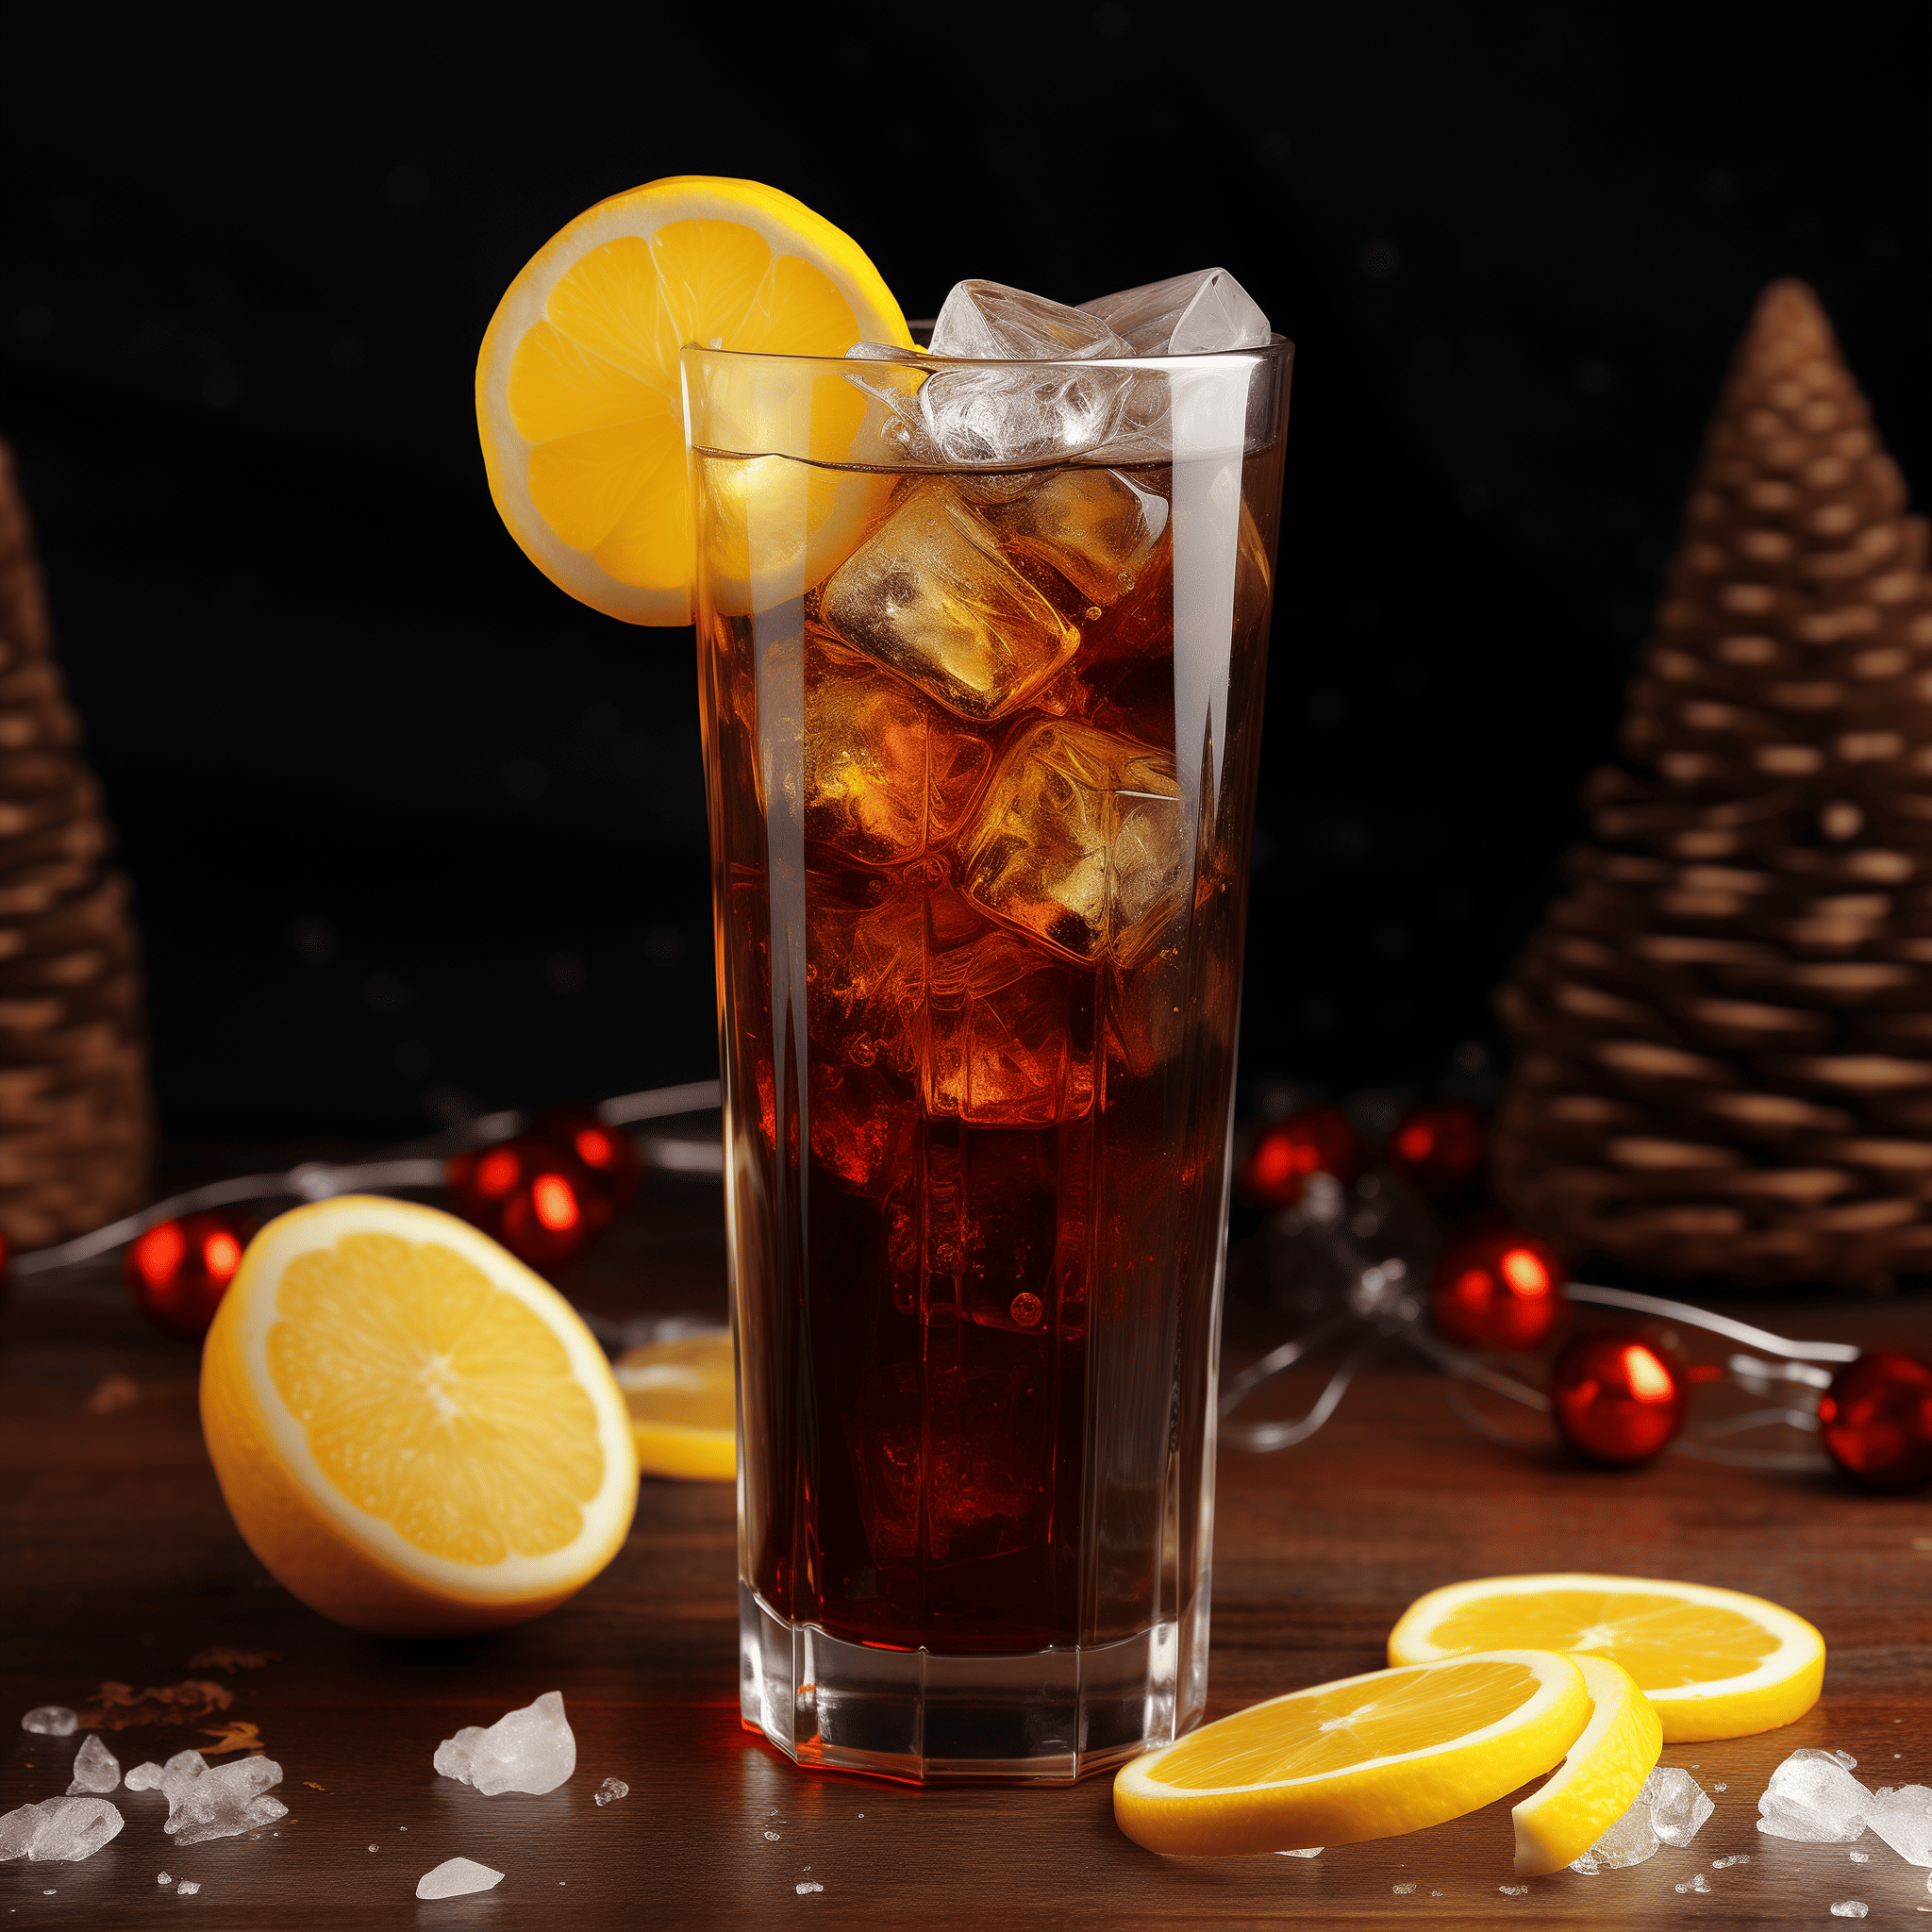 Black Friday Cocktail Recipe - The Black Friday cocktail offers a rich, creamy vanilla flavor with a fizzy, refreshing finish from the cola. It's a sweet, indulgent treat with a robust vodka presence that warms the palate.